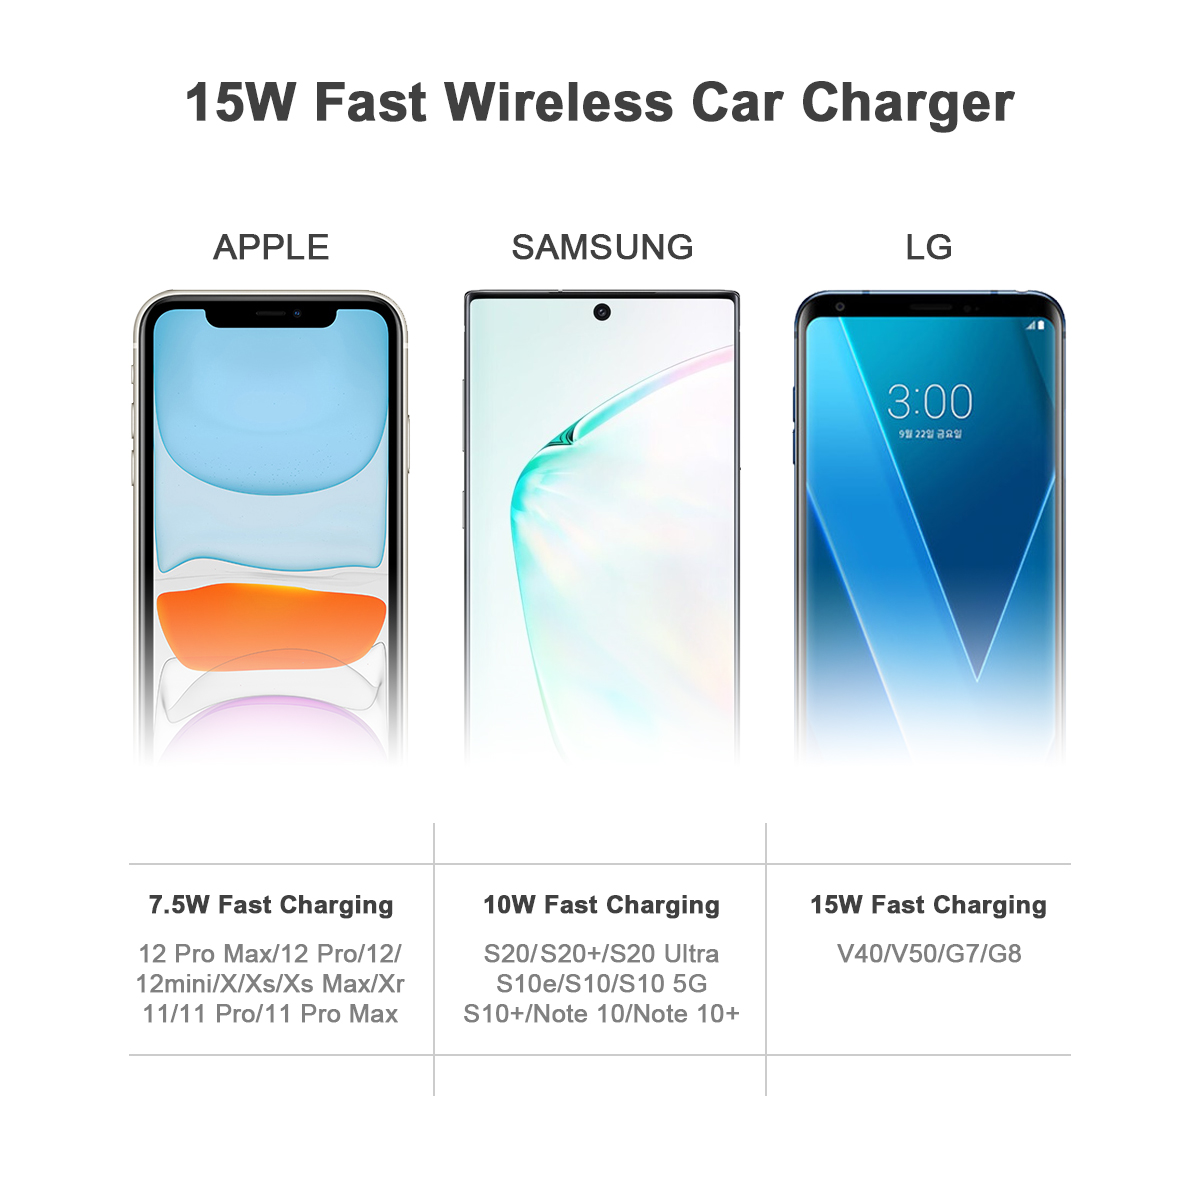 WT C29F Samsung wireless car charger details 10